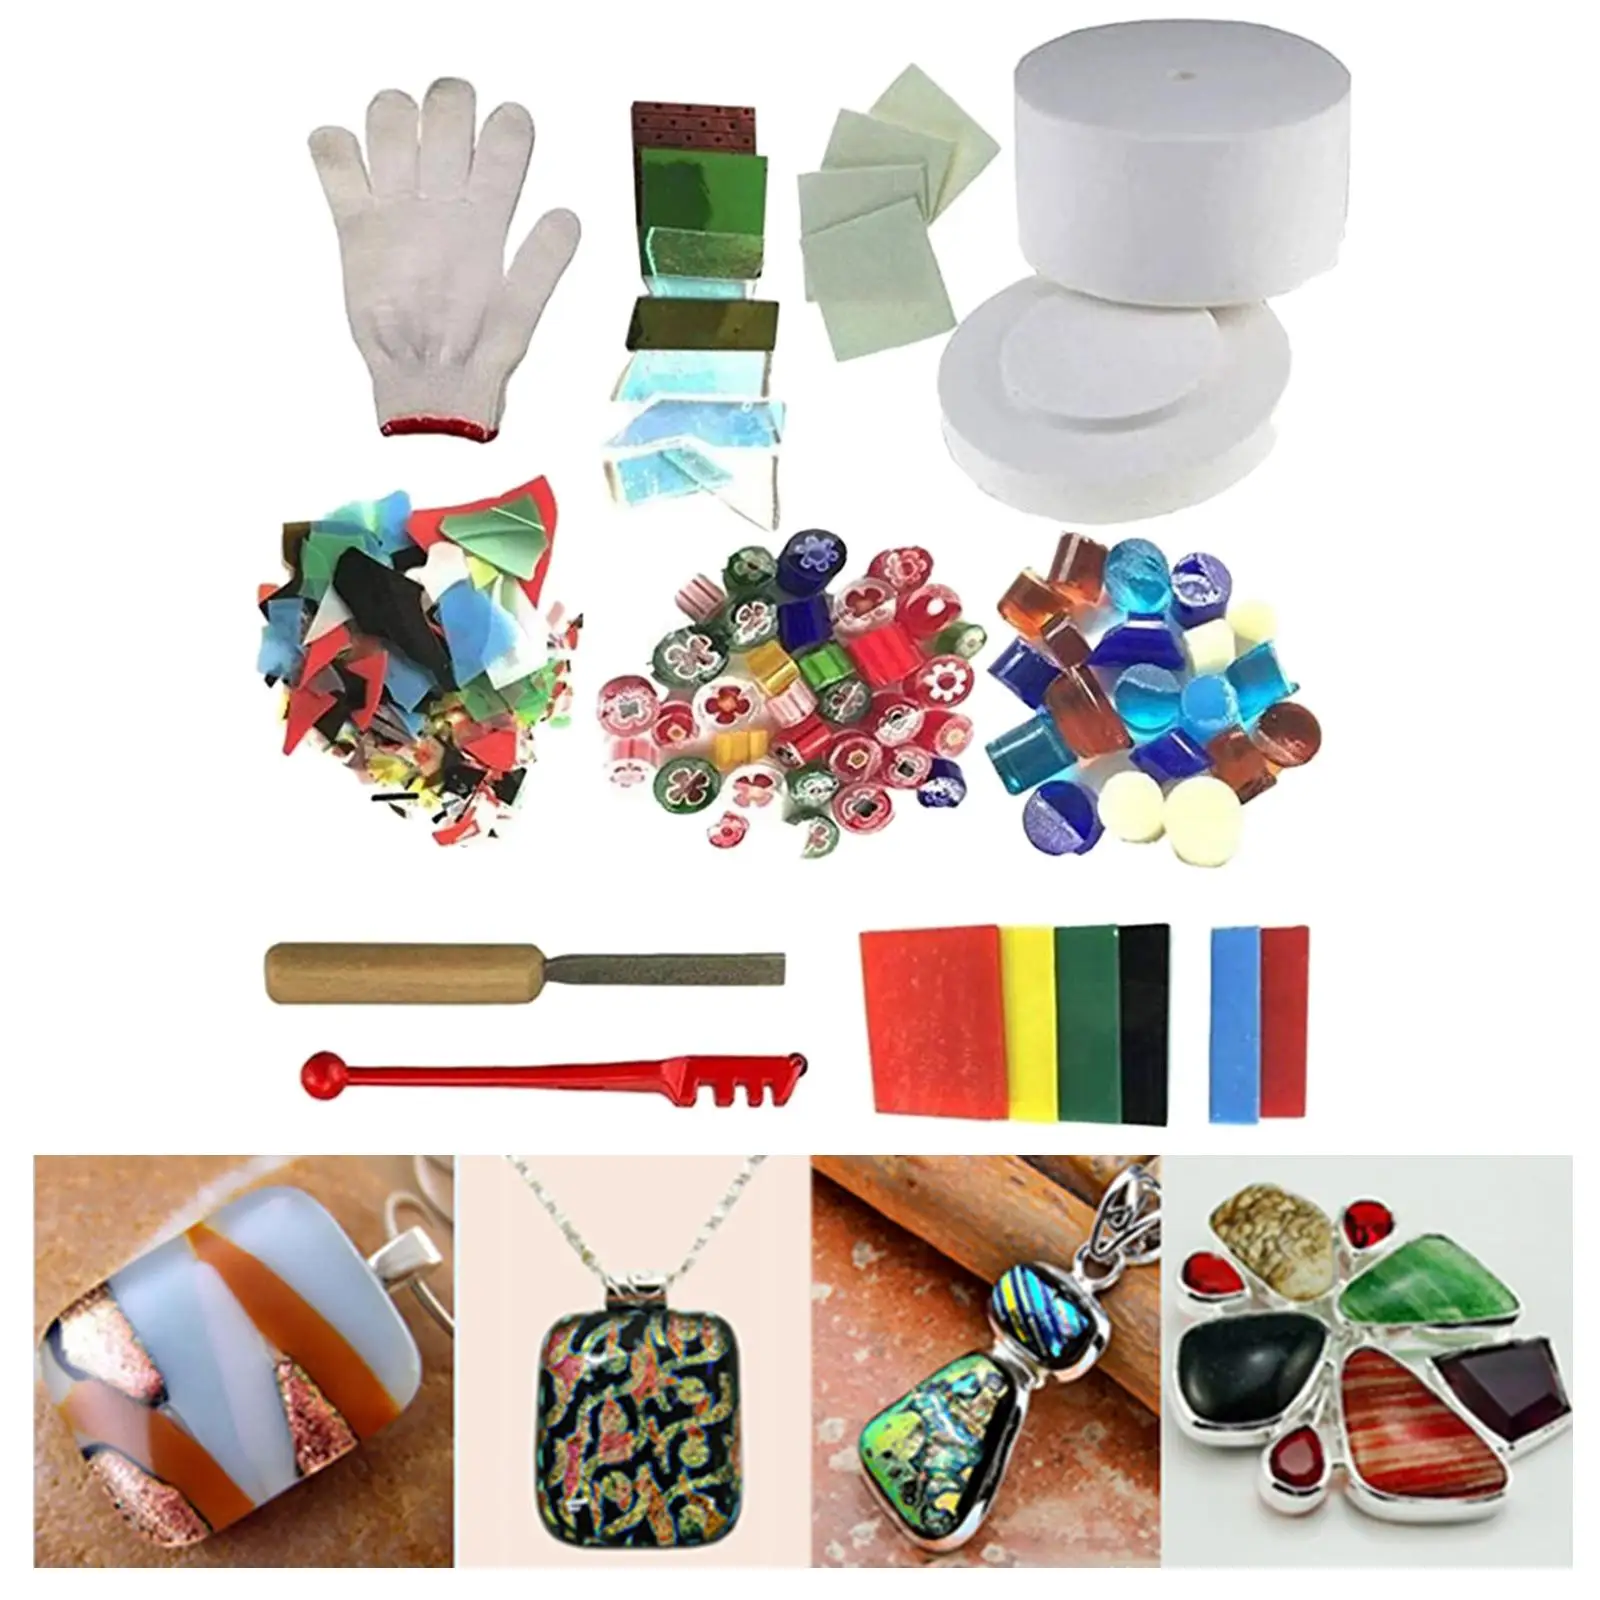 Professional Simple Making DIY Jewelry Glass Fusing Tools Set Microwave Kiln and DIY Fusing Glass Jewelry Set 